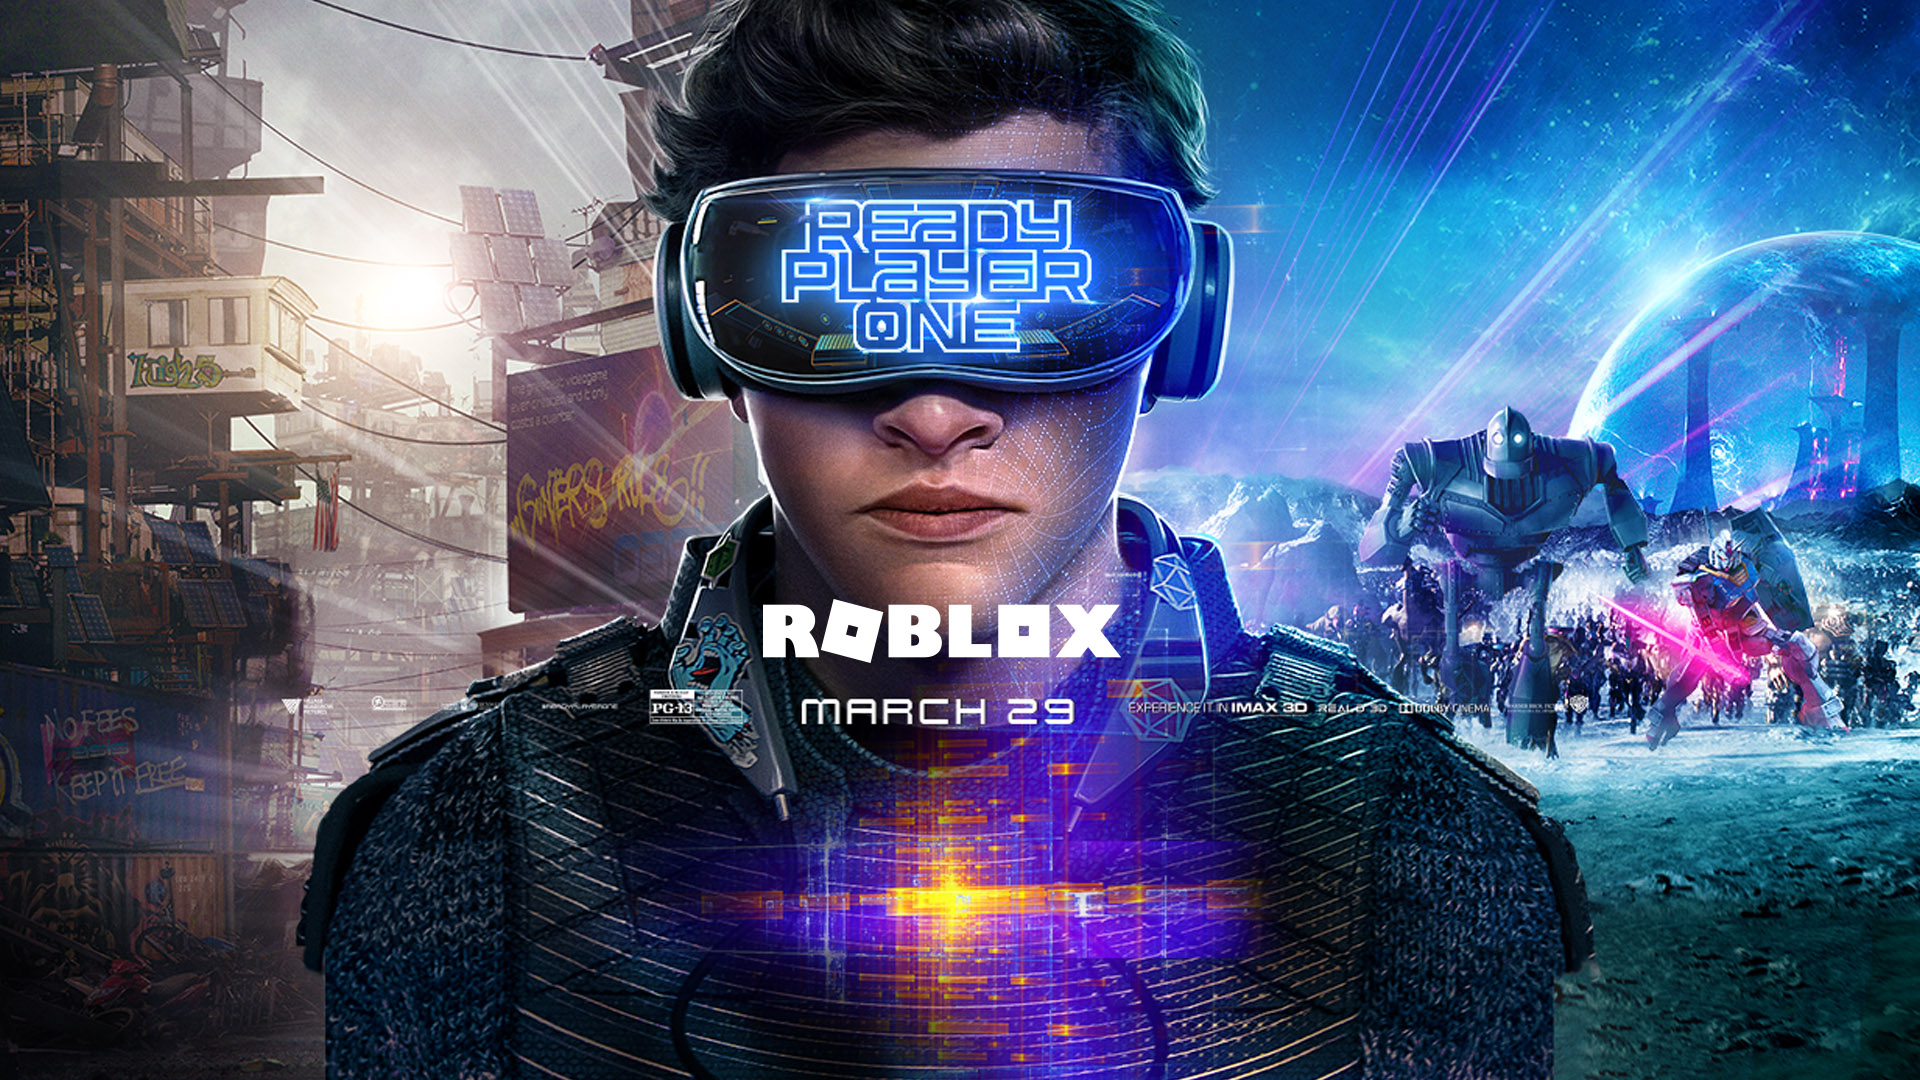 A Look Inside The Roblox Ready Player One Adventure So Far Roblox Blog